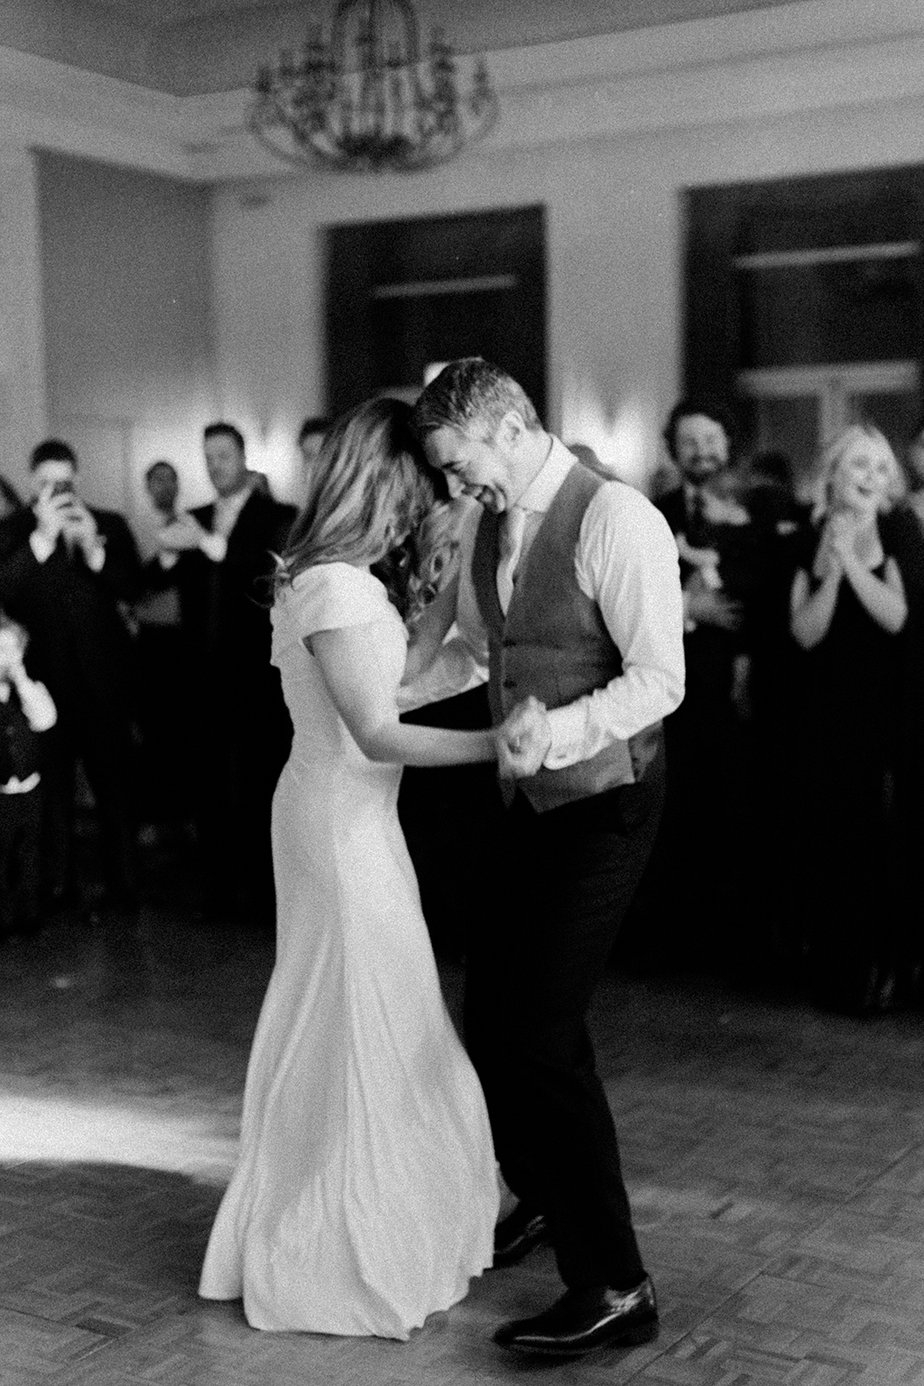 Bride and groom dance dancefloor smiling smile black and white